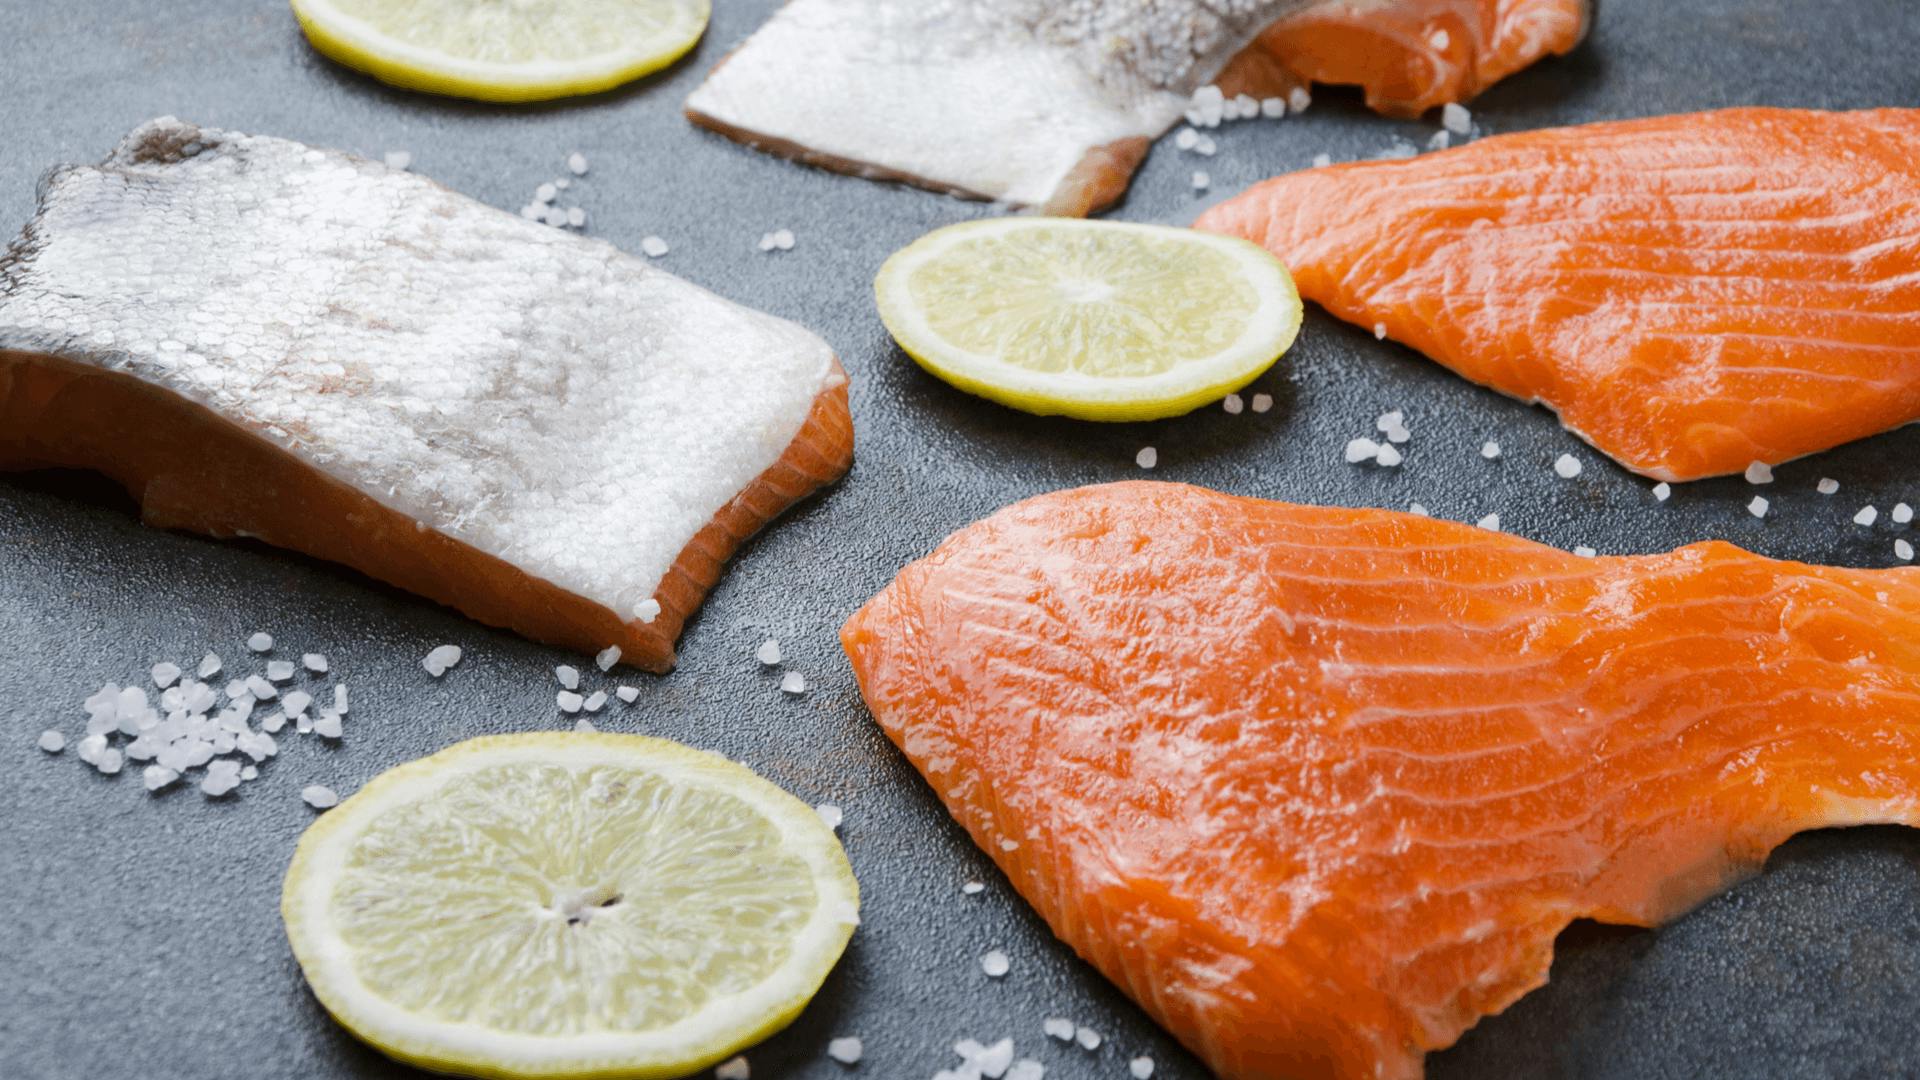 Why oily fish is so good for you?